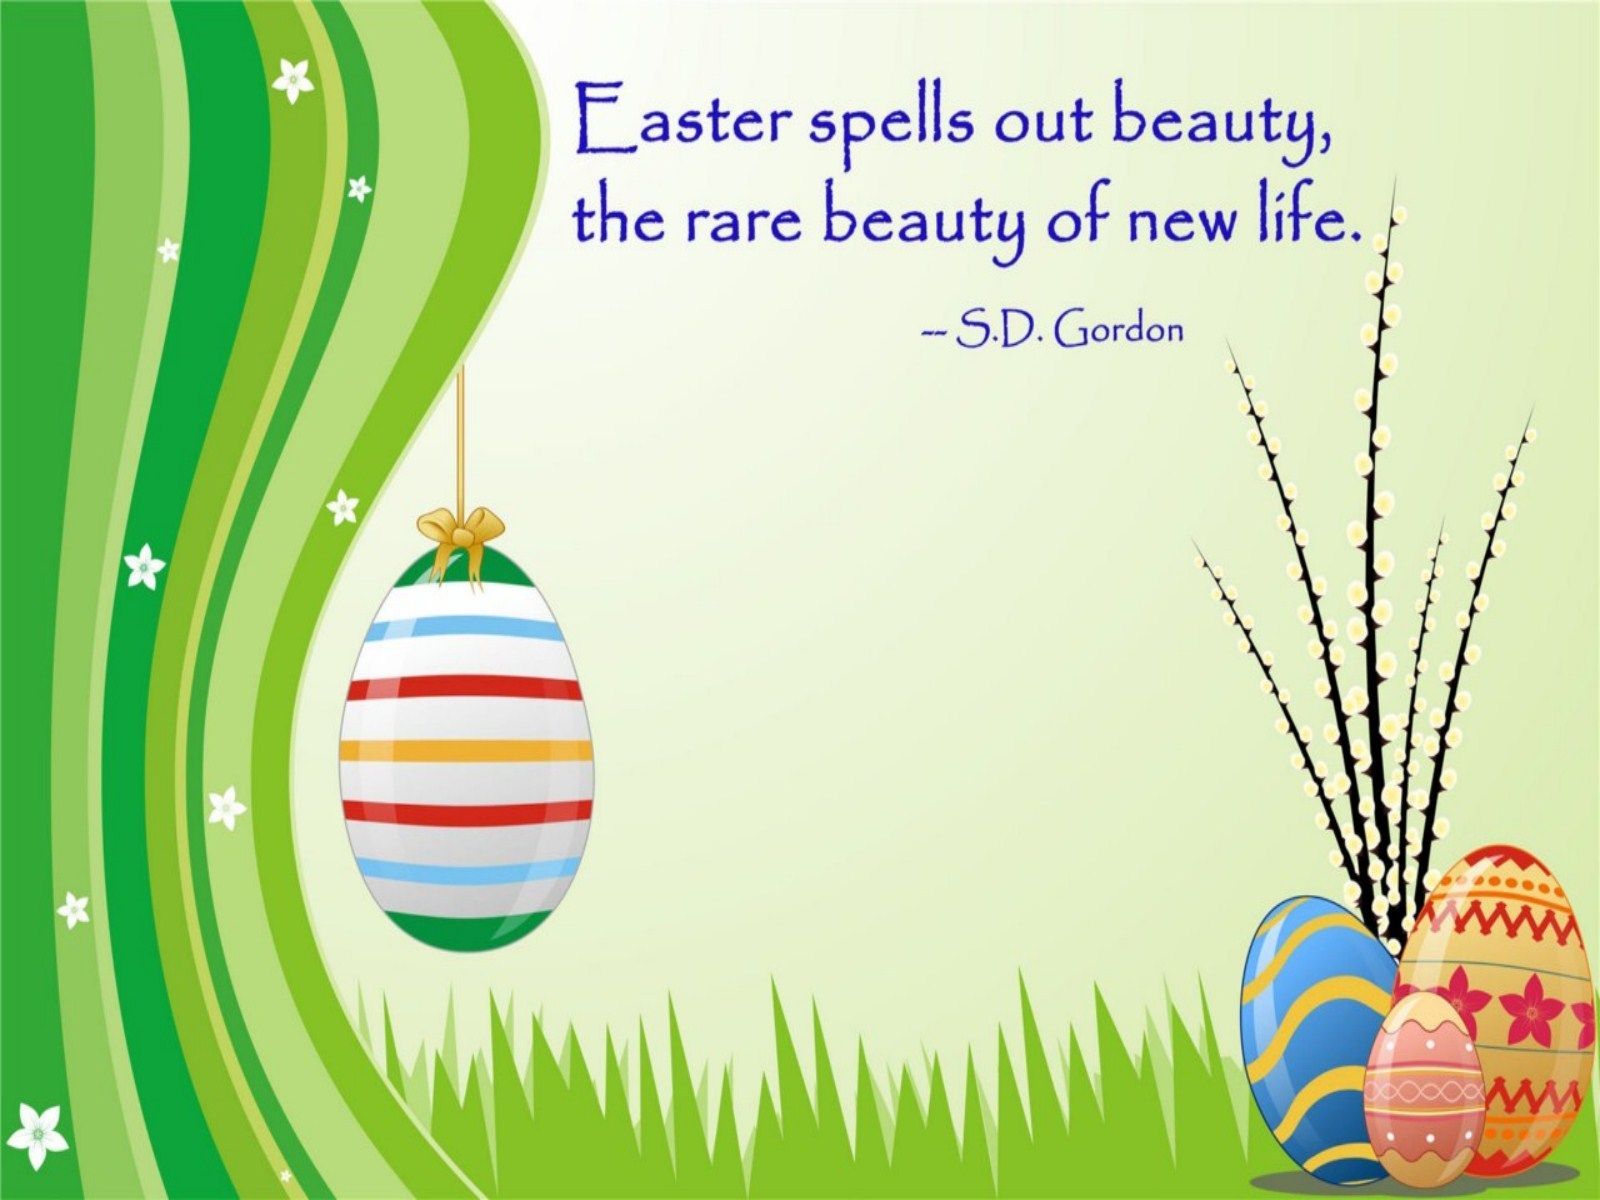 thats really cute. Happy easter quotes, Easter inspirational quotes, Easter sunday image